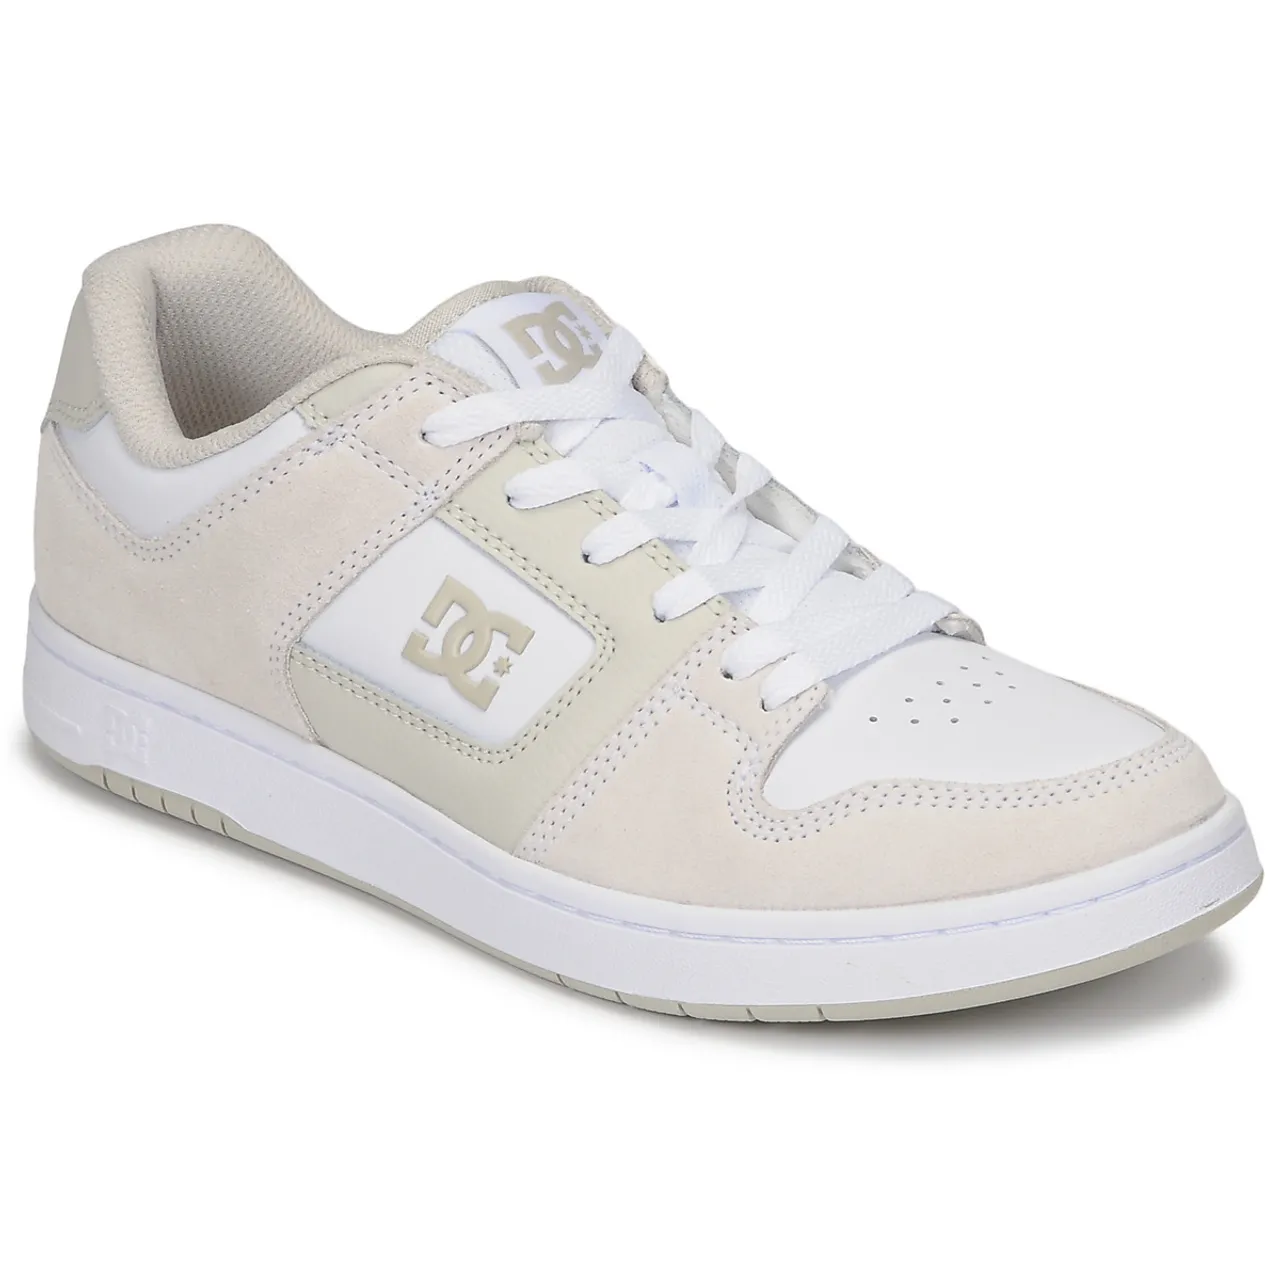 DC Shoes  MANTECA 4  women's Shoes (Trainers) in Beige